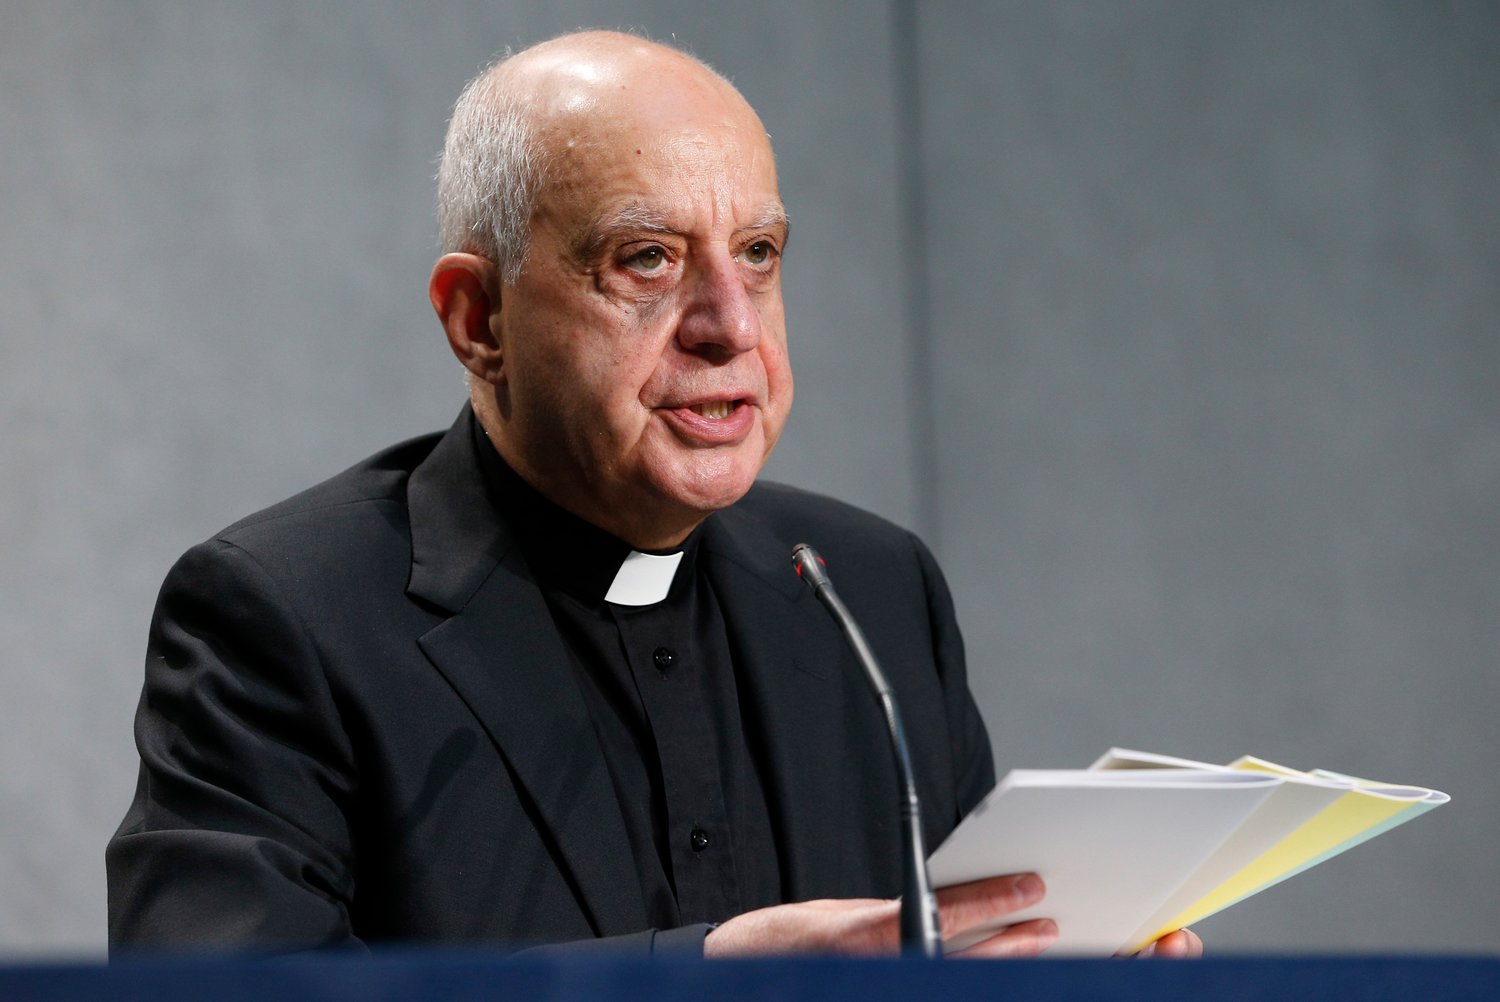 Archbishop Rino Fisichella, president of the Pontifical Council for Promoting New Evangelization, holds copies of Pope Francis’ document, “Antiquum Ministerium” (Ancient Ministry), during a news conference for the release of the document at the Vatican May 11, 2021. The archbishop is in charge of preparations for Holy Year 2025.